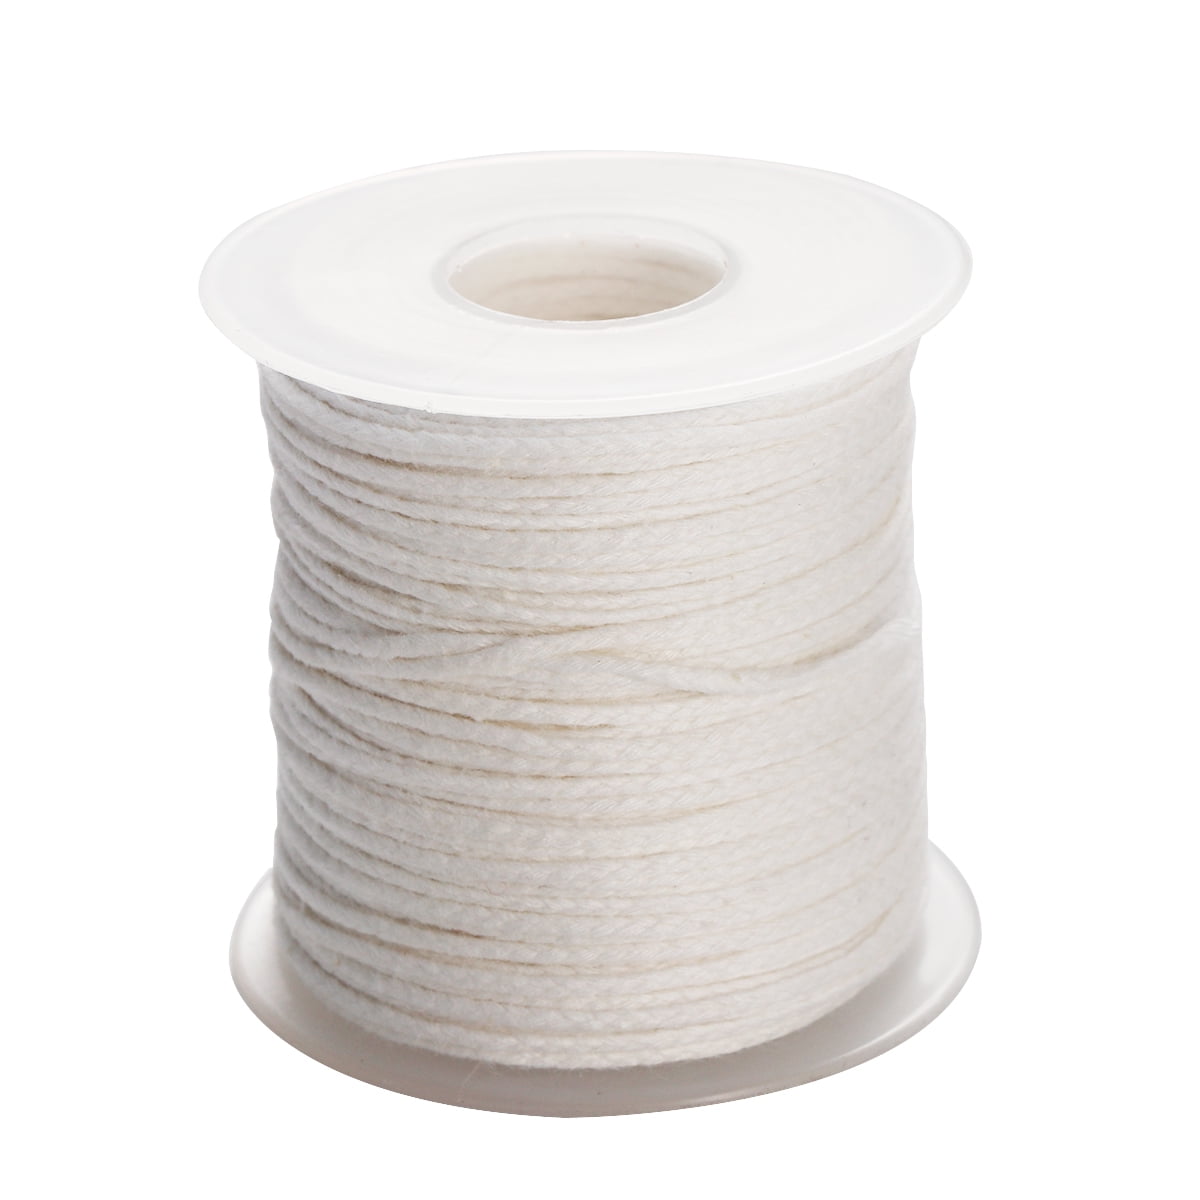 100 x 8-20cm Long Pre Waxed Wicks For Home Candle Making Cotton With  Sustainers Y9E3 